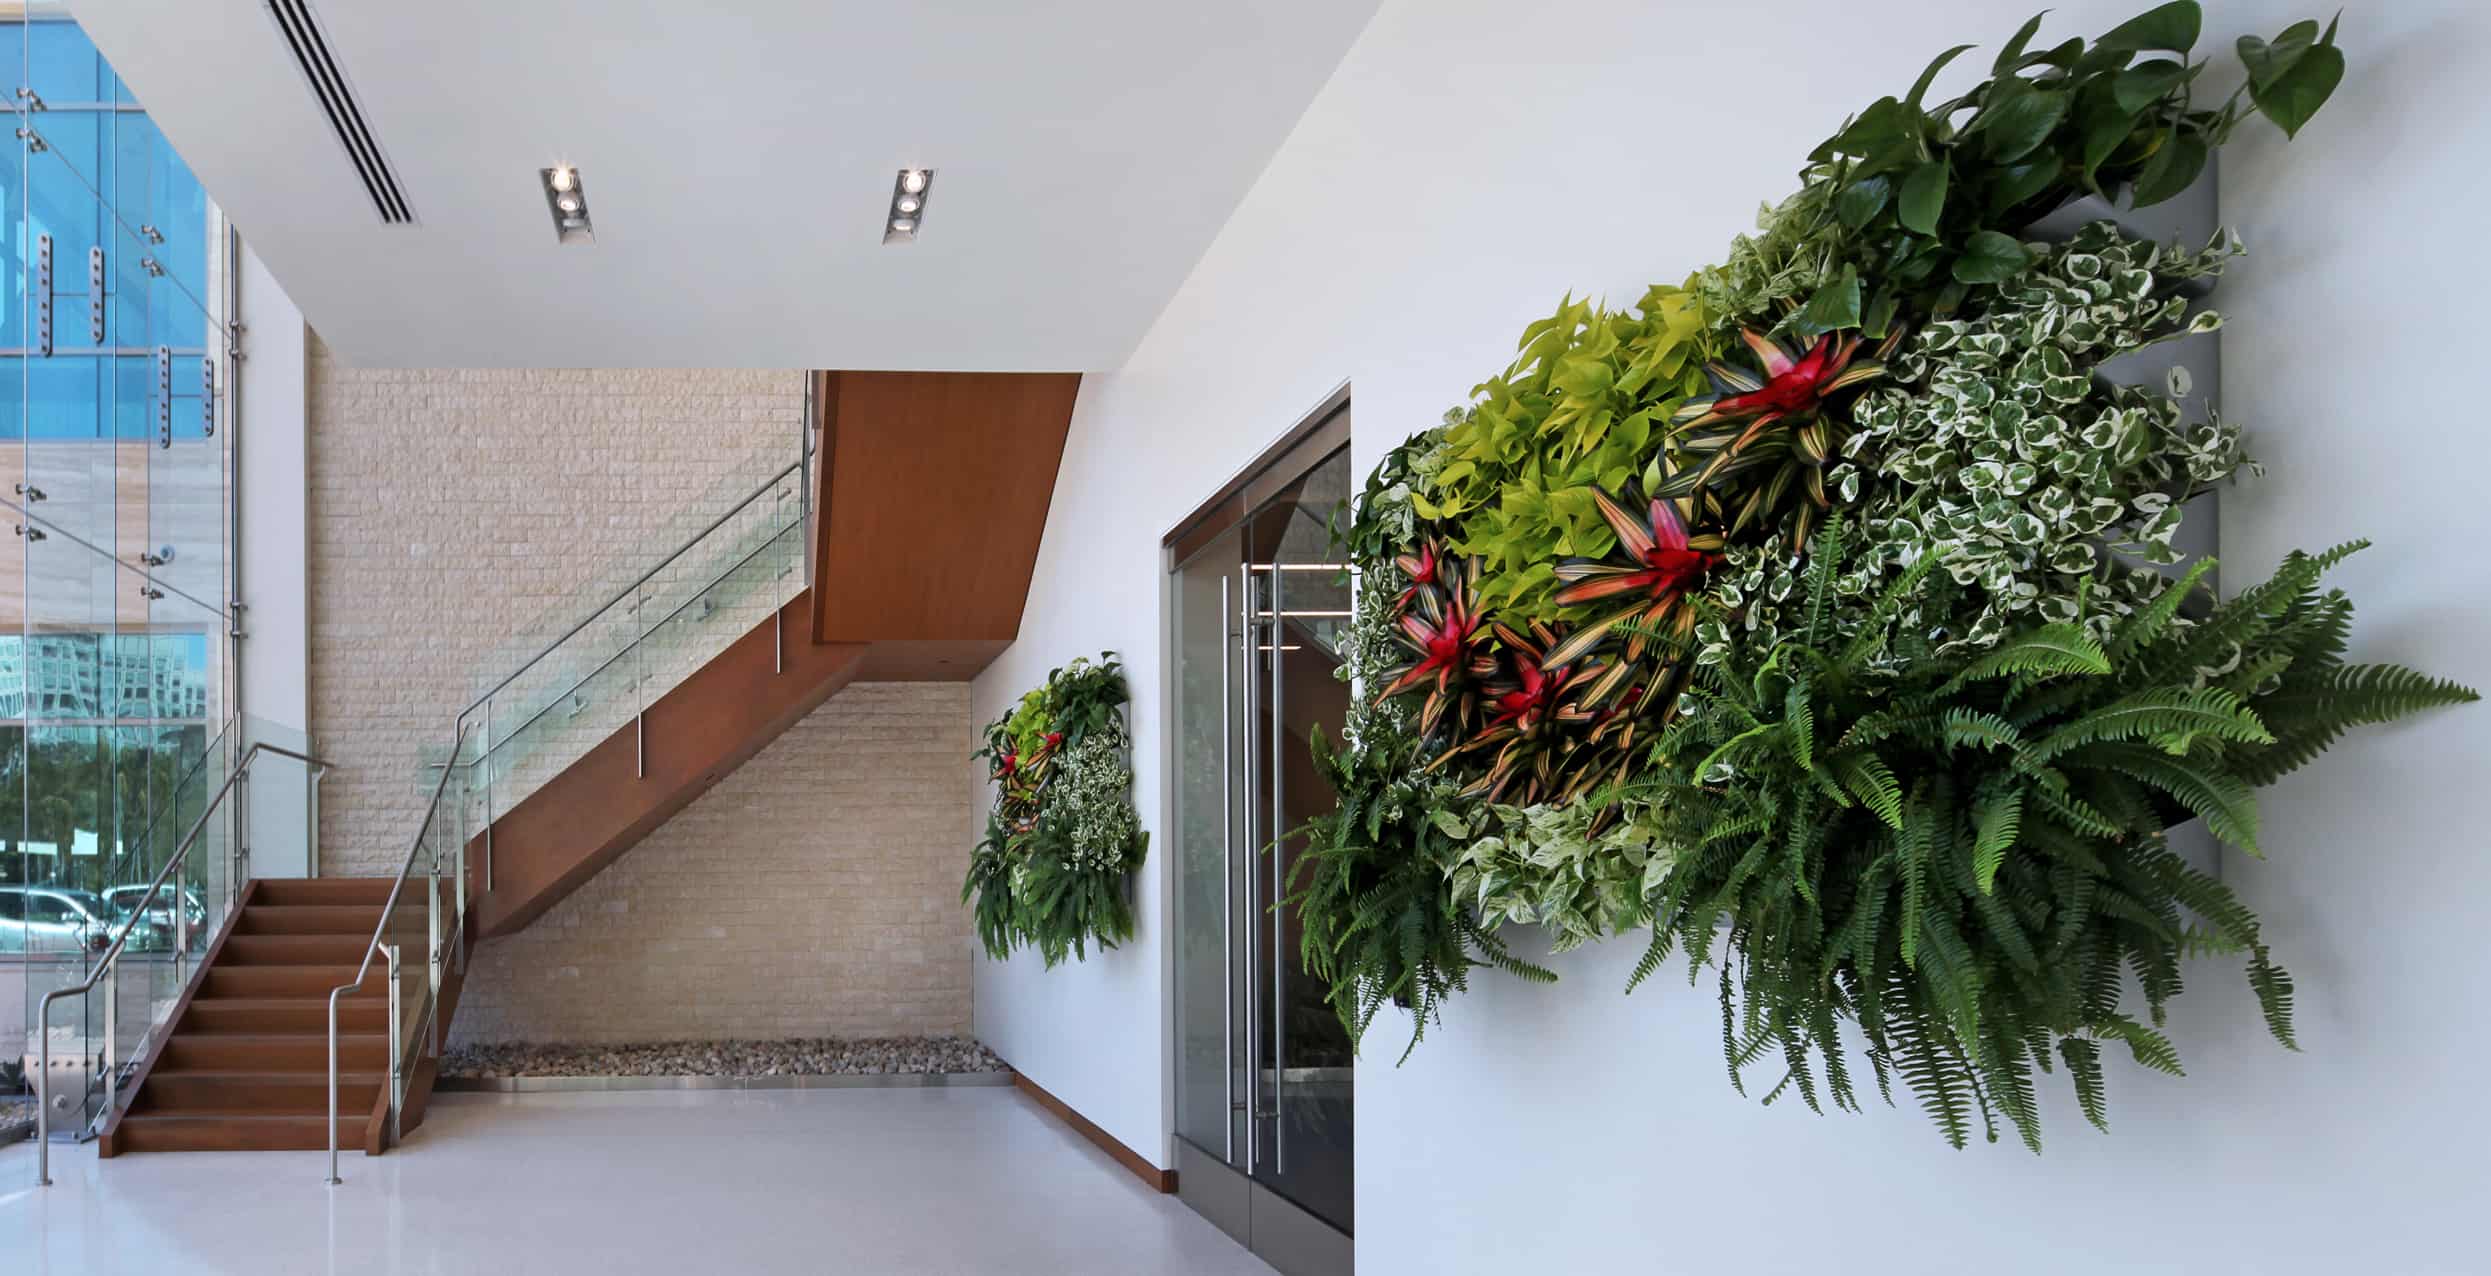 Natural light is the perfect environment for living walls.